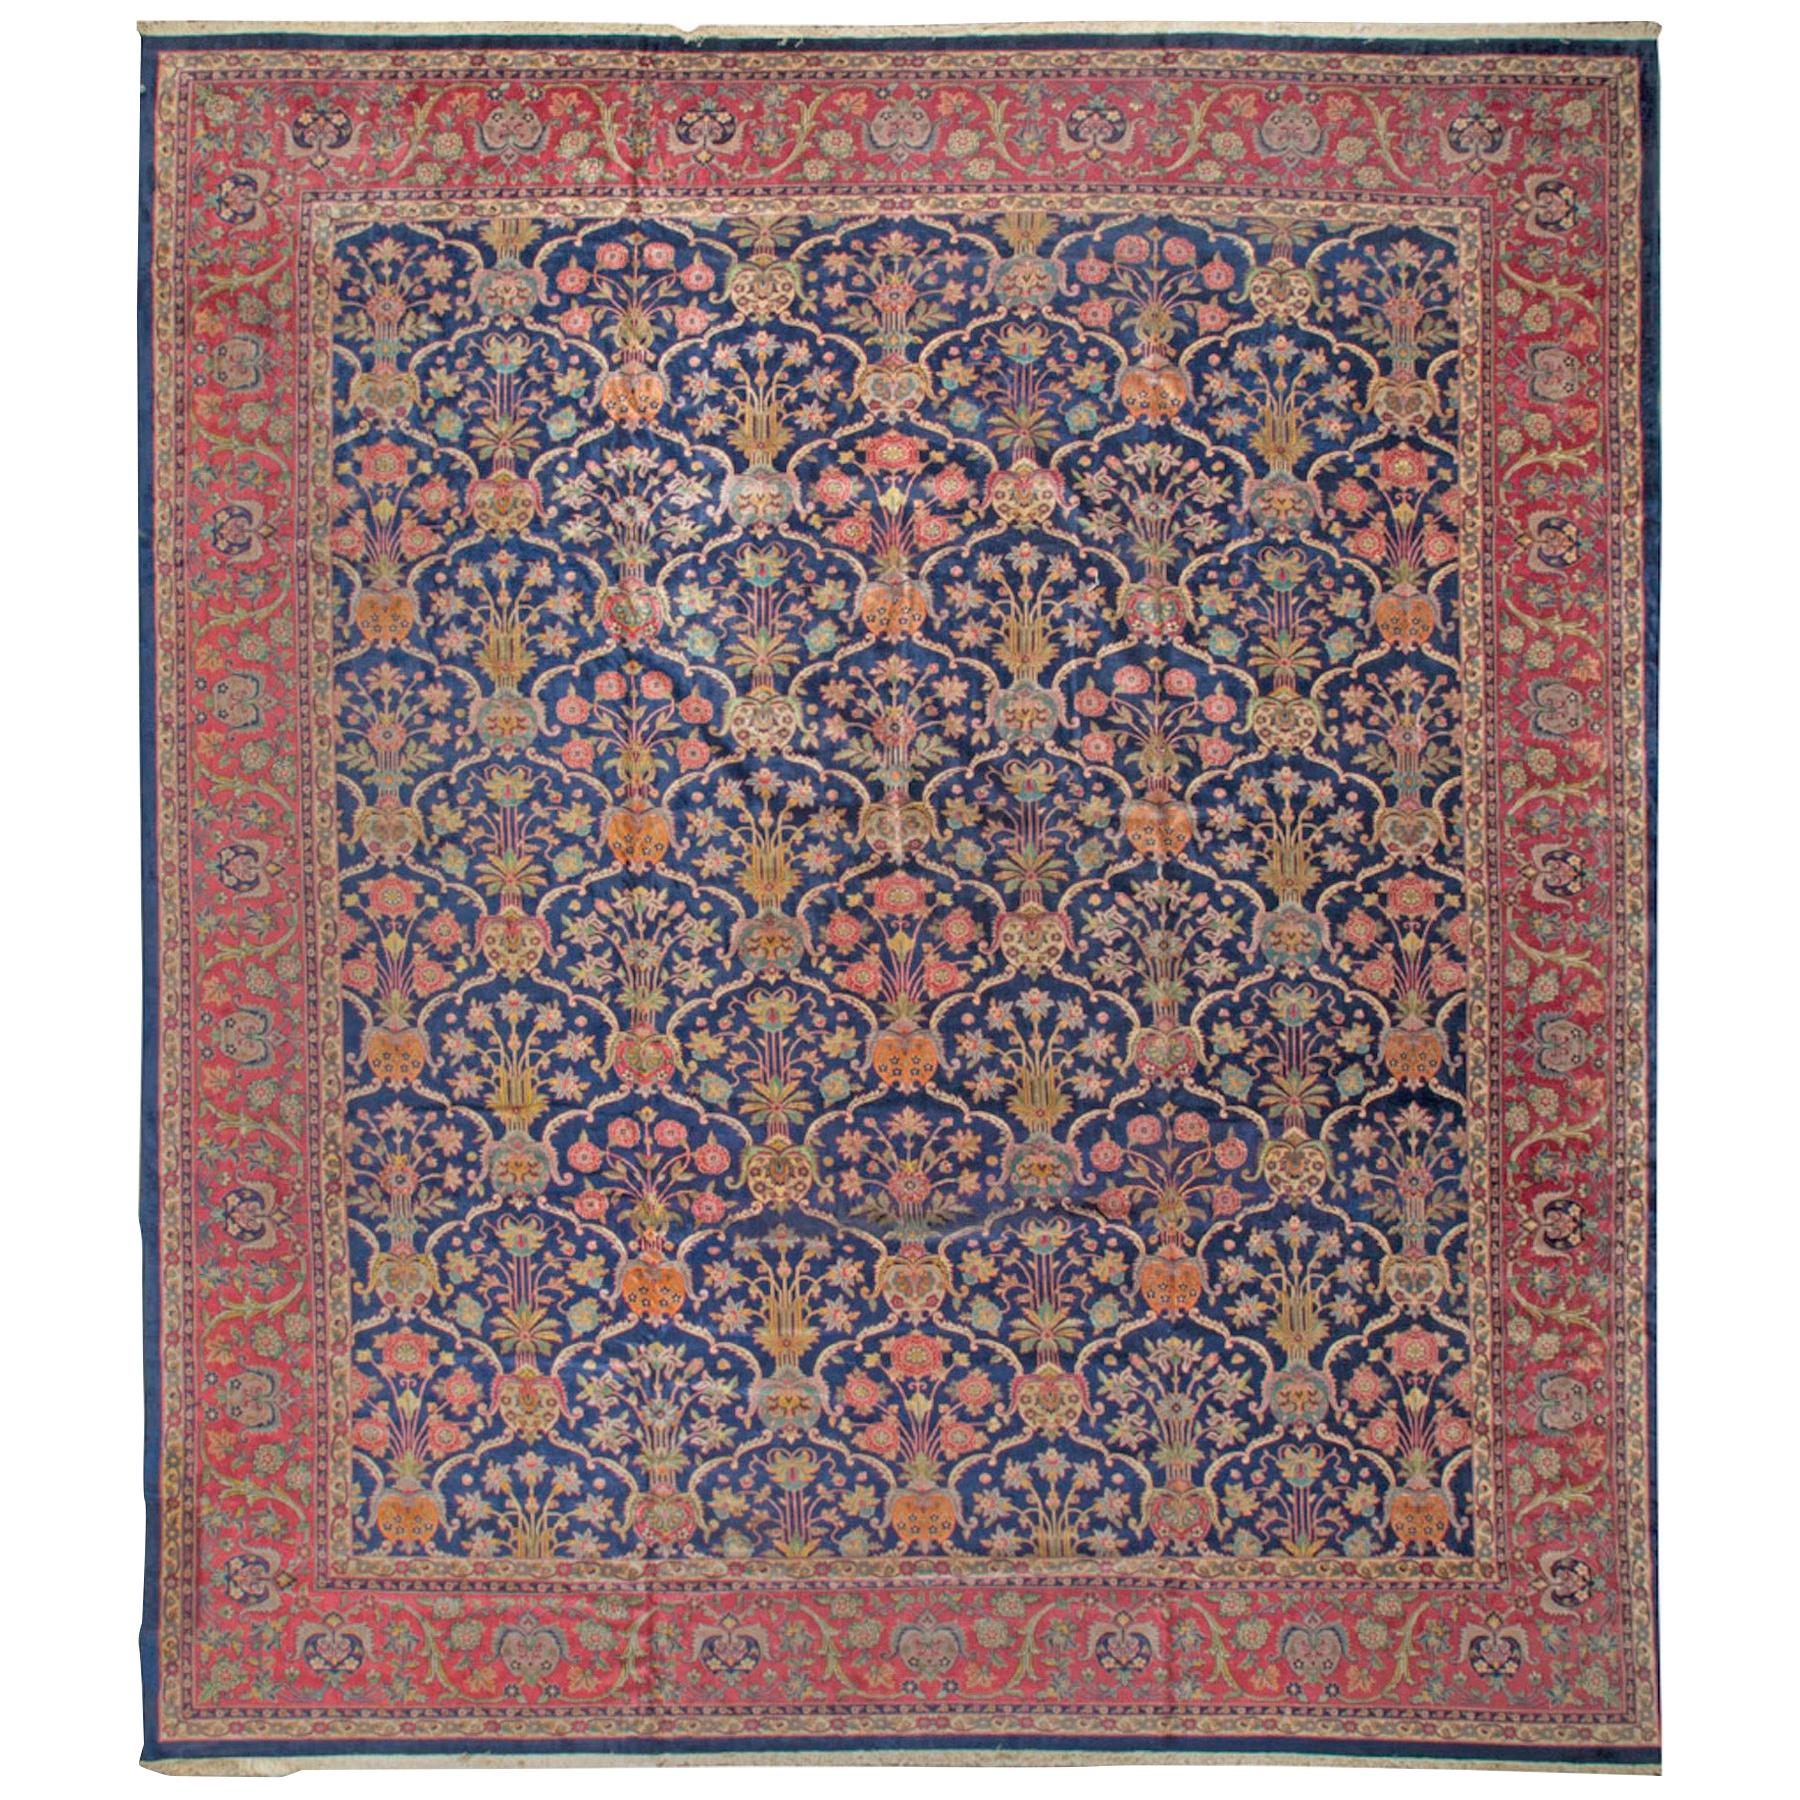 Antique Oversize Indian Agra Rug, circa 1880 21'0 x 24'0. For Sale